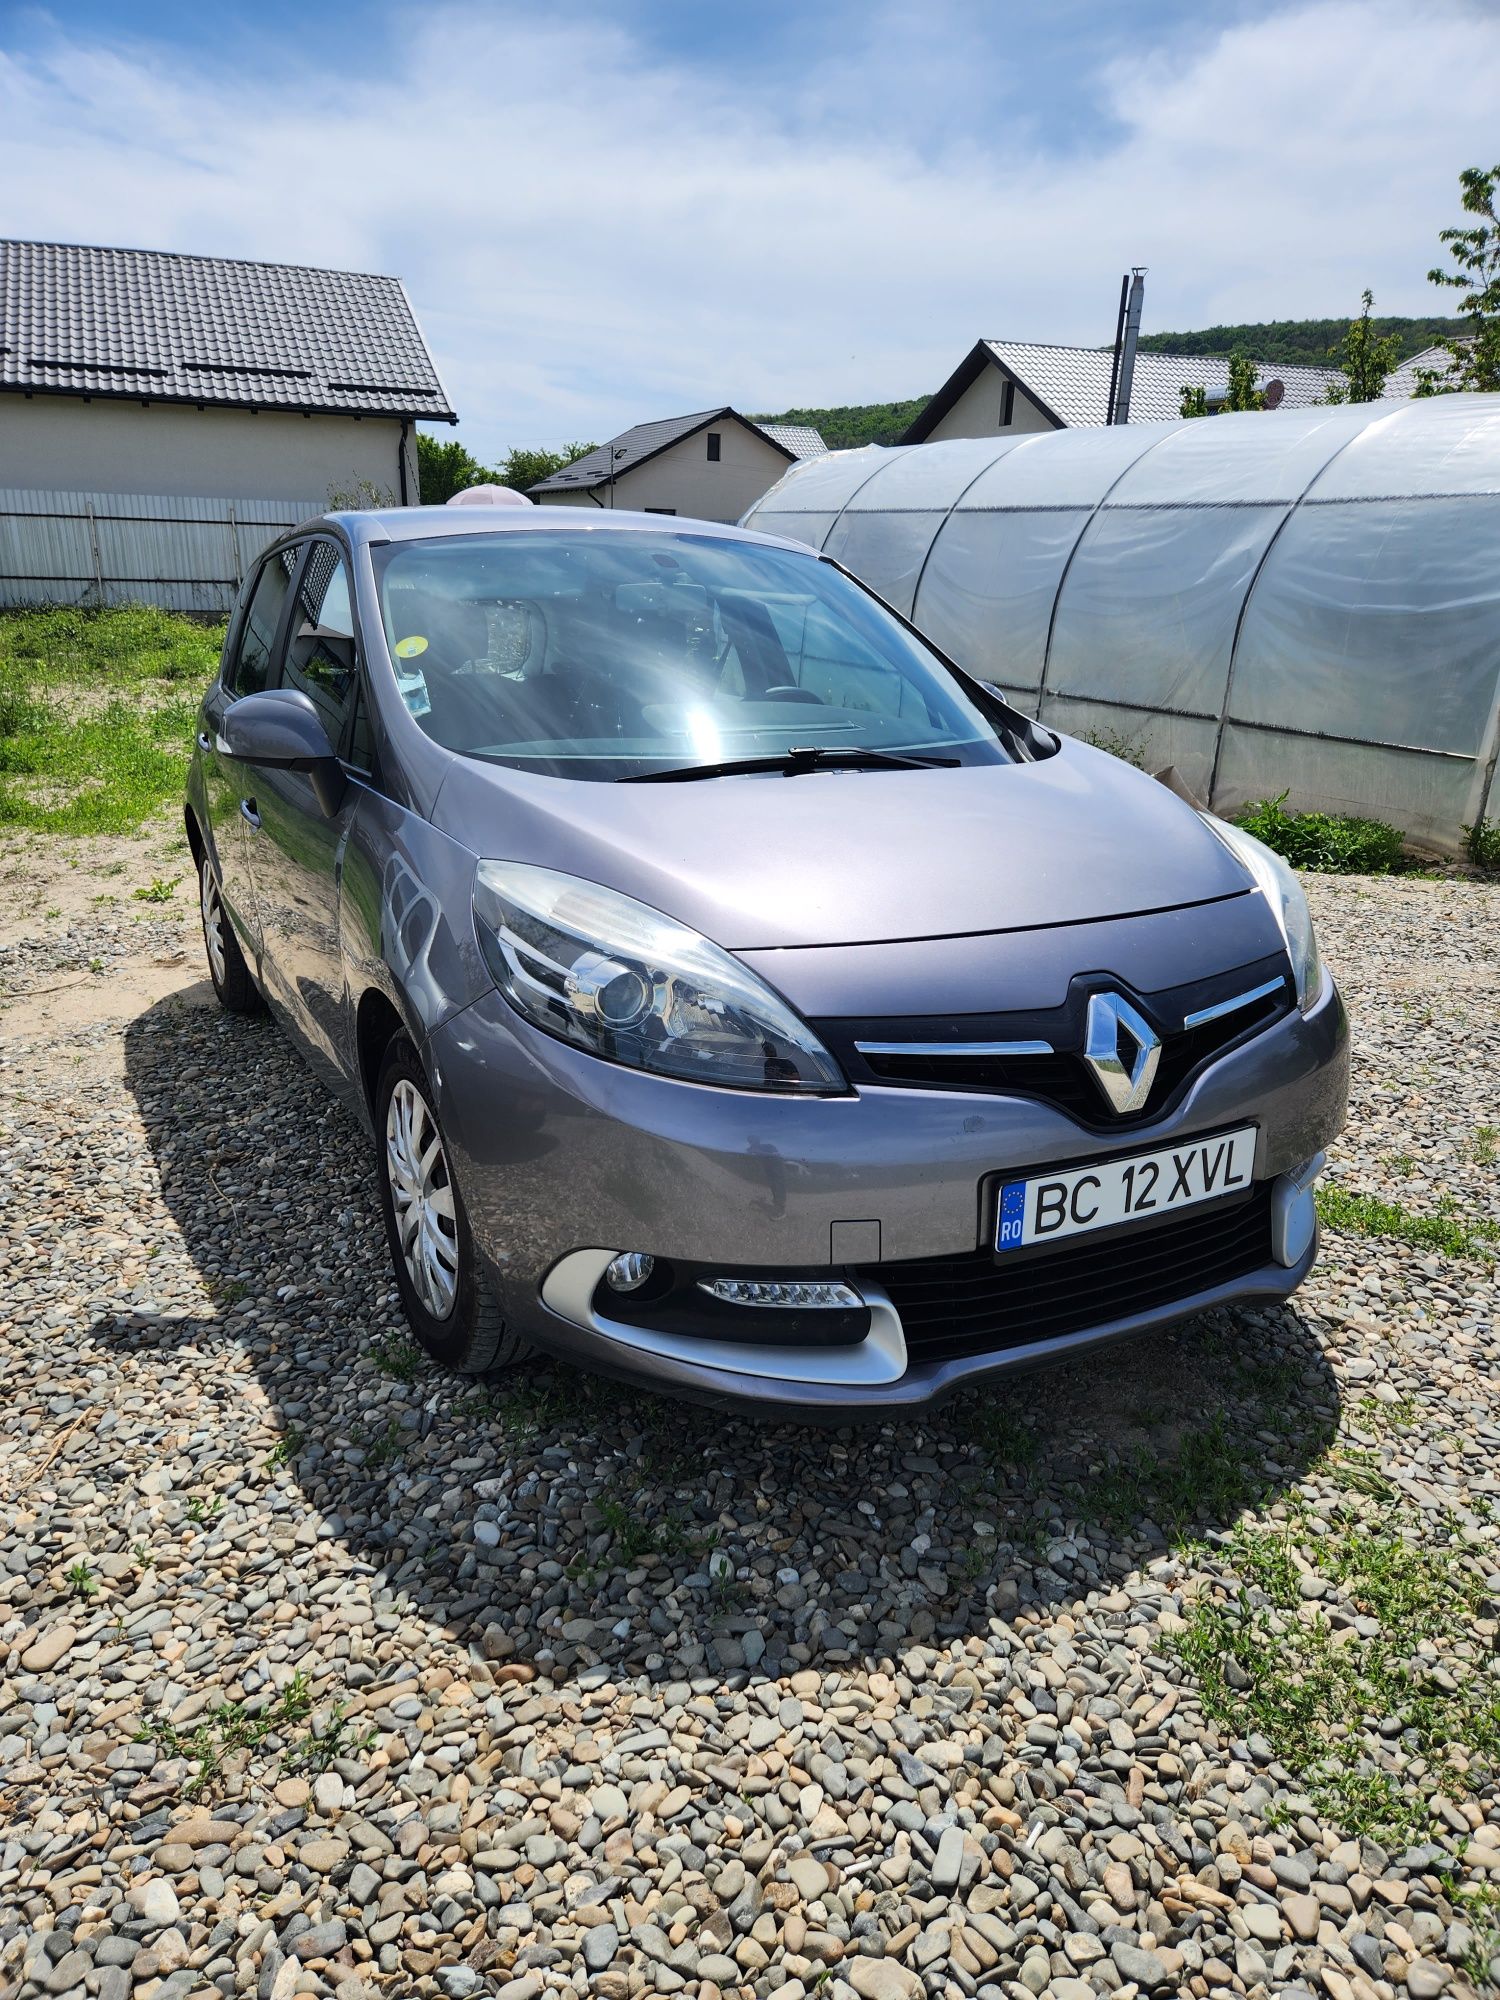 RENAULT SCENIC 2013 1.5 dCI 110 cp